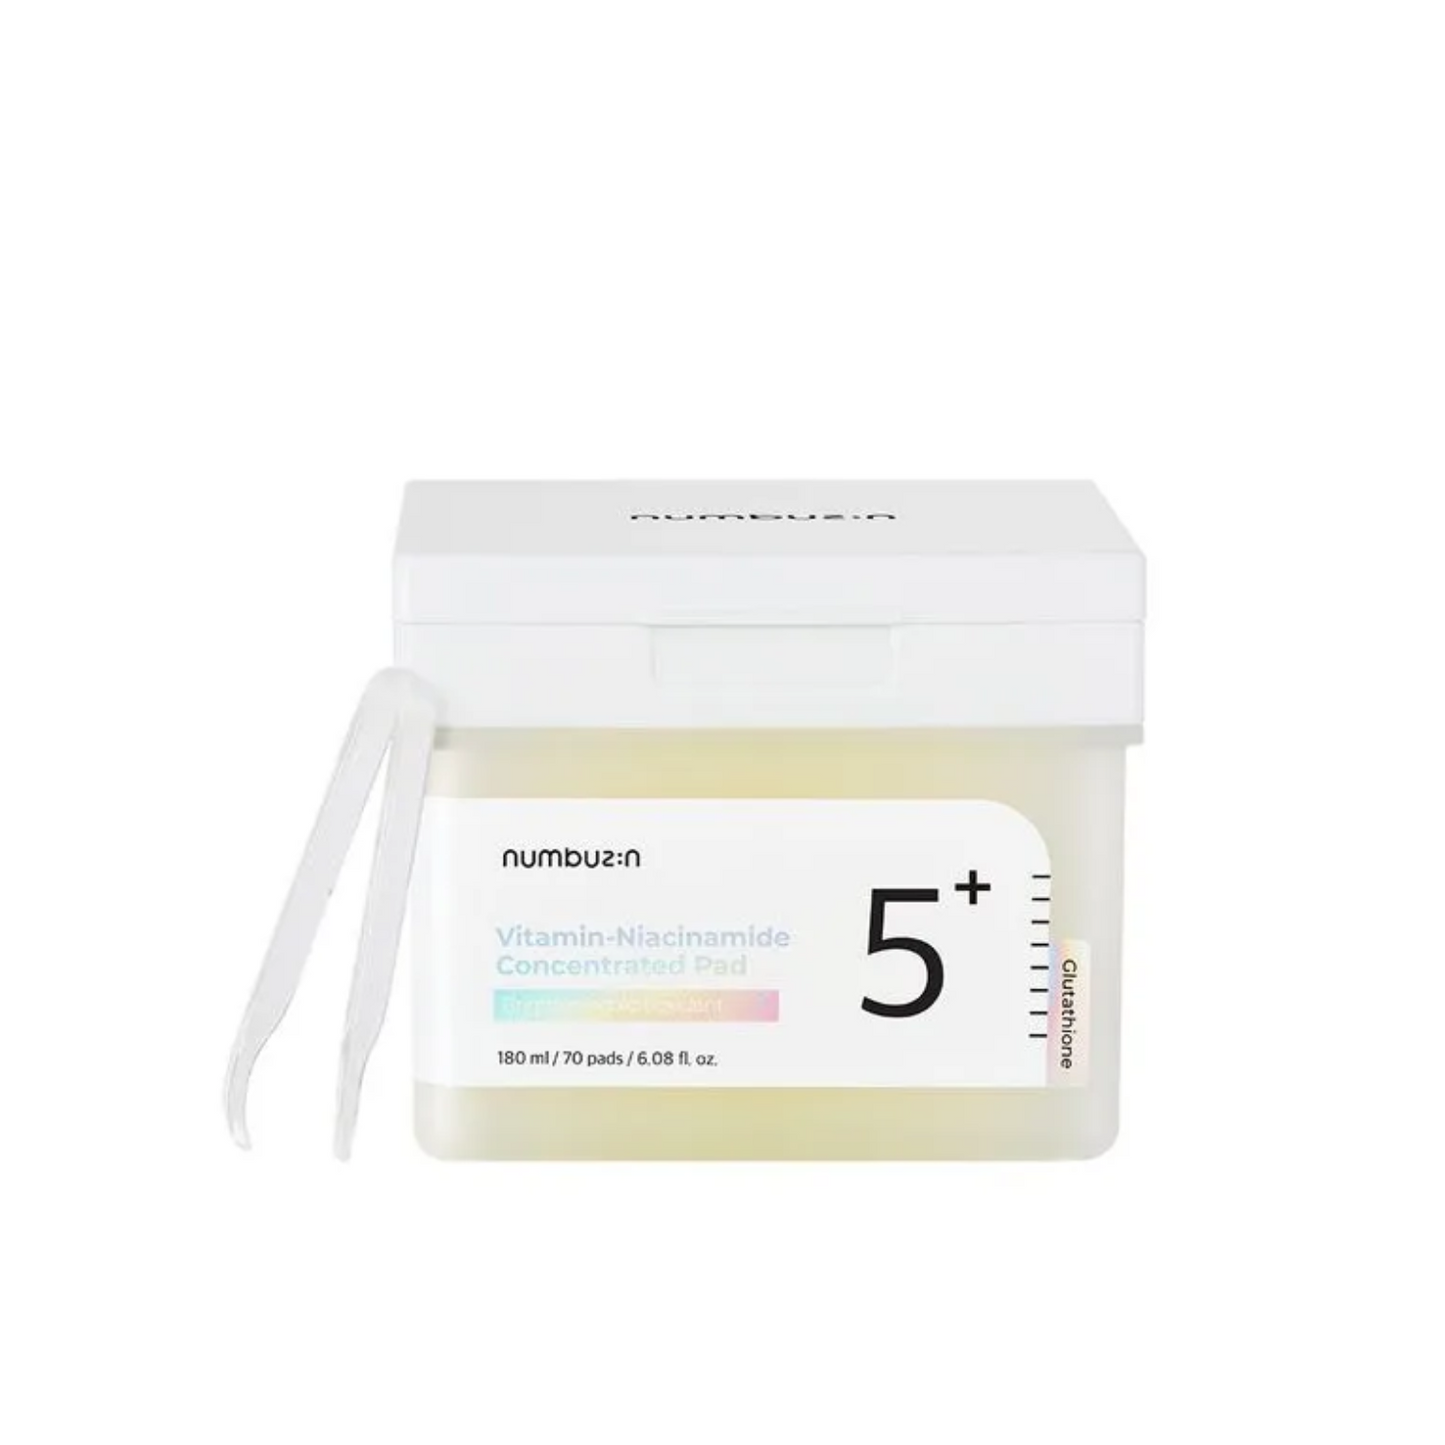 Numbuzin No.5 Vitamin-Niacinamide Concentrated Pad (70pads)